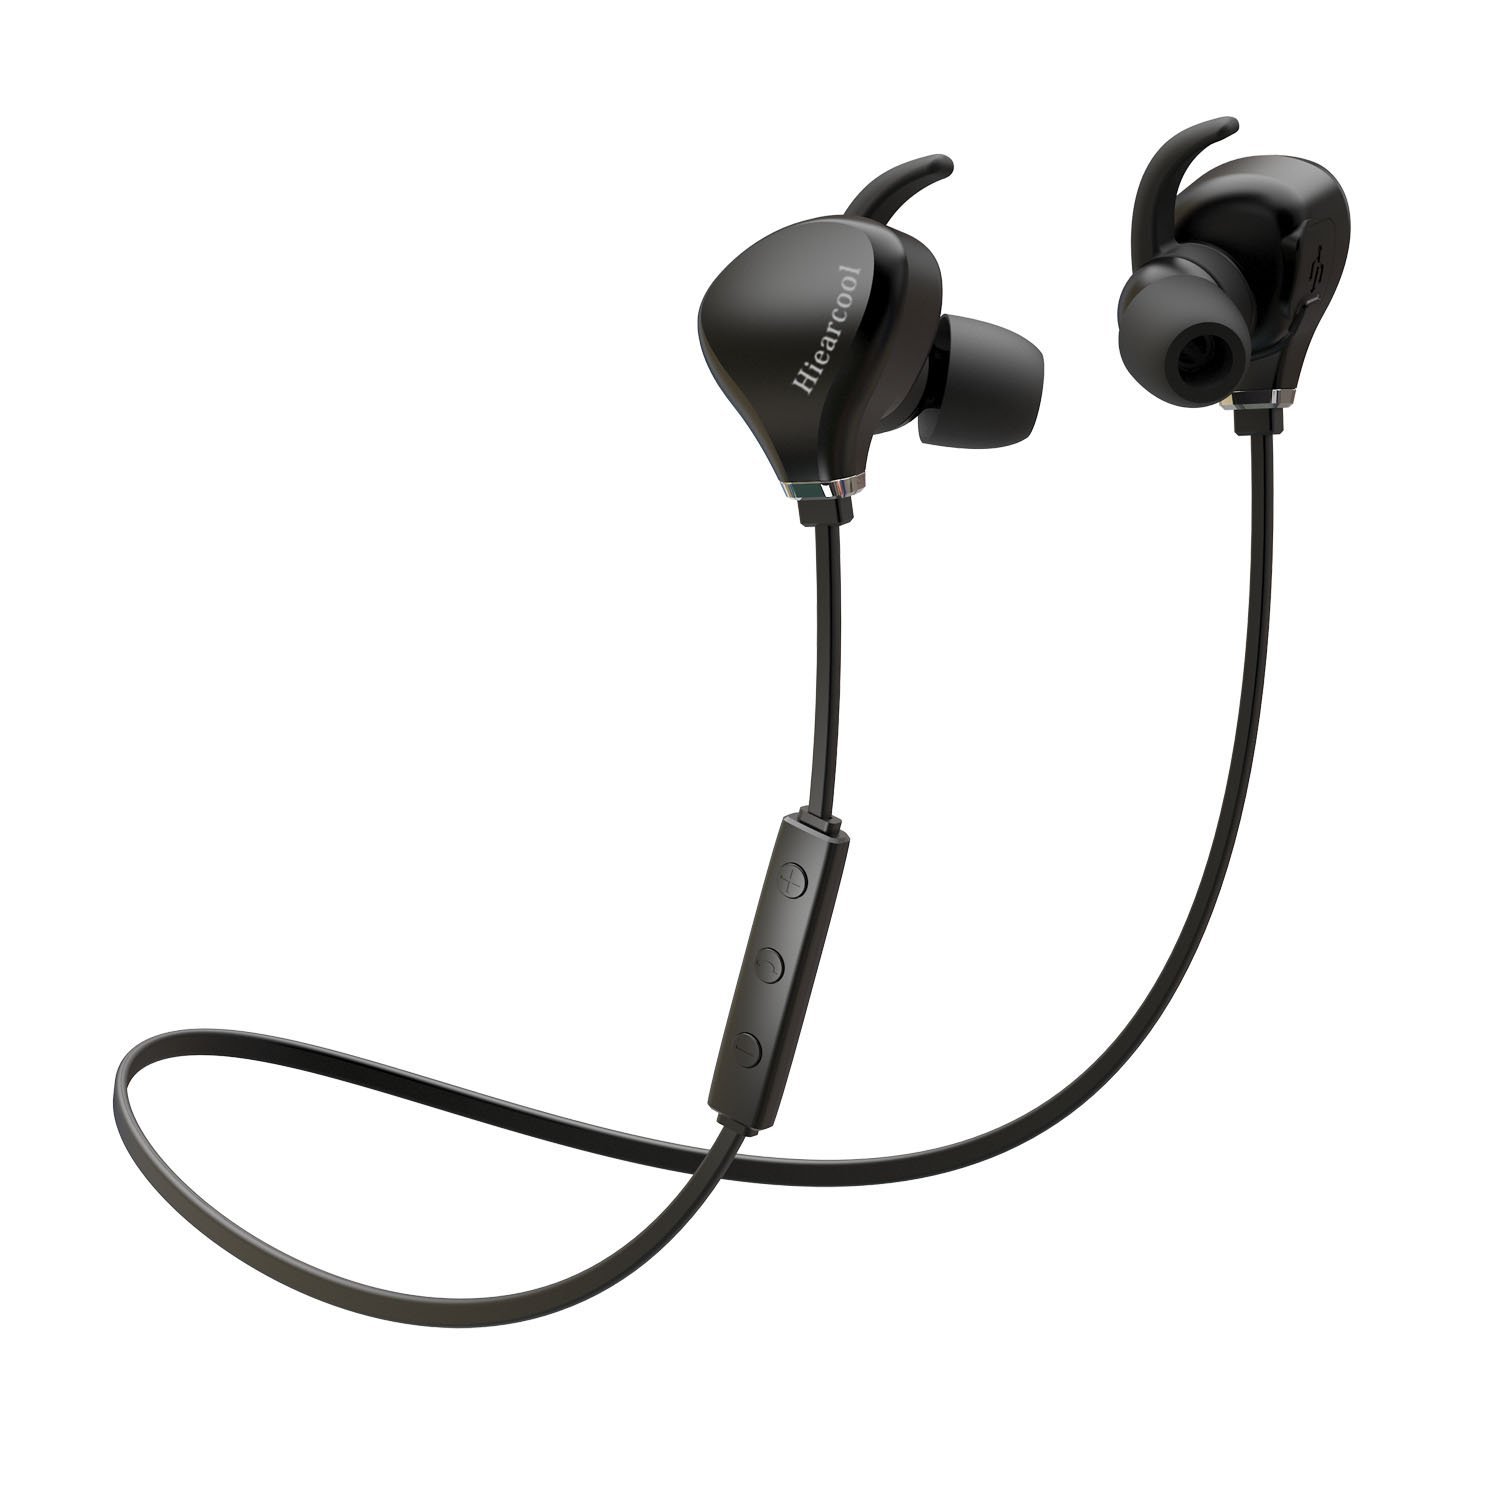 Hiearcool Q1 Bluetooth Headphones With Microphone